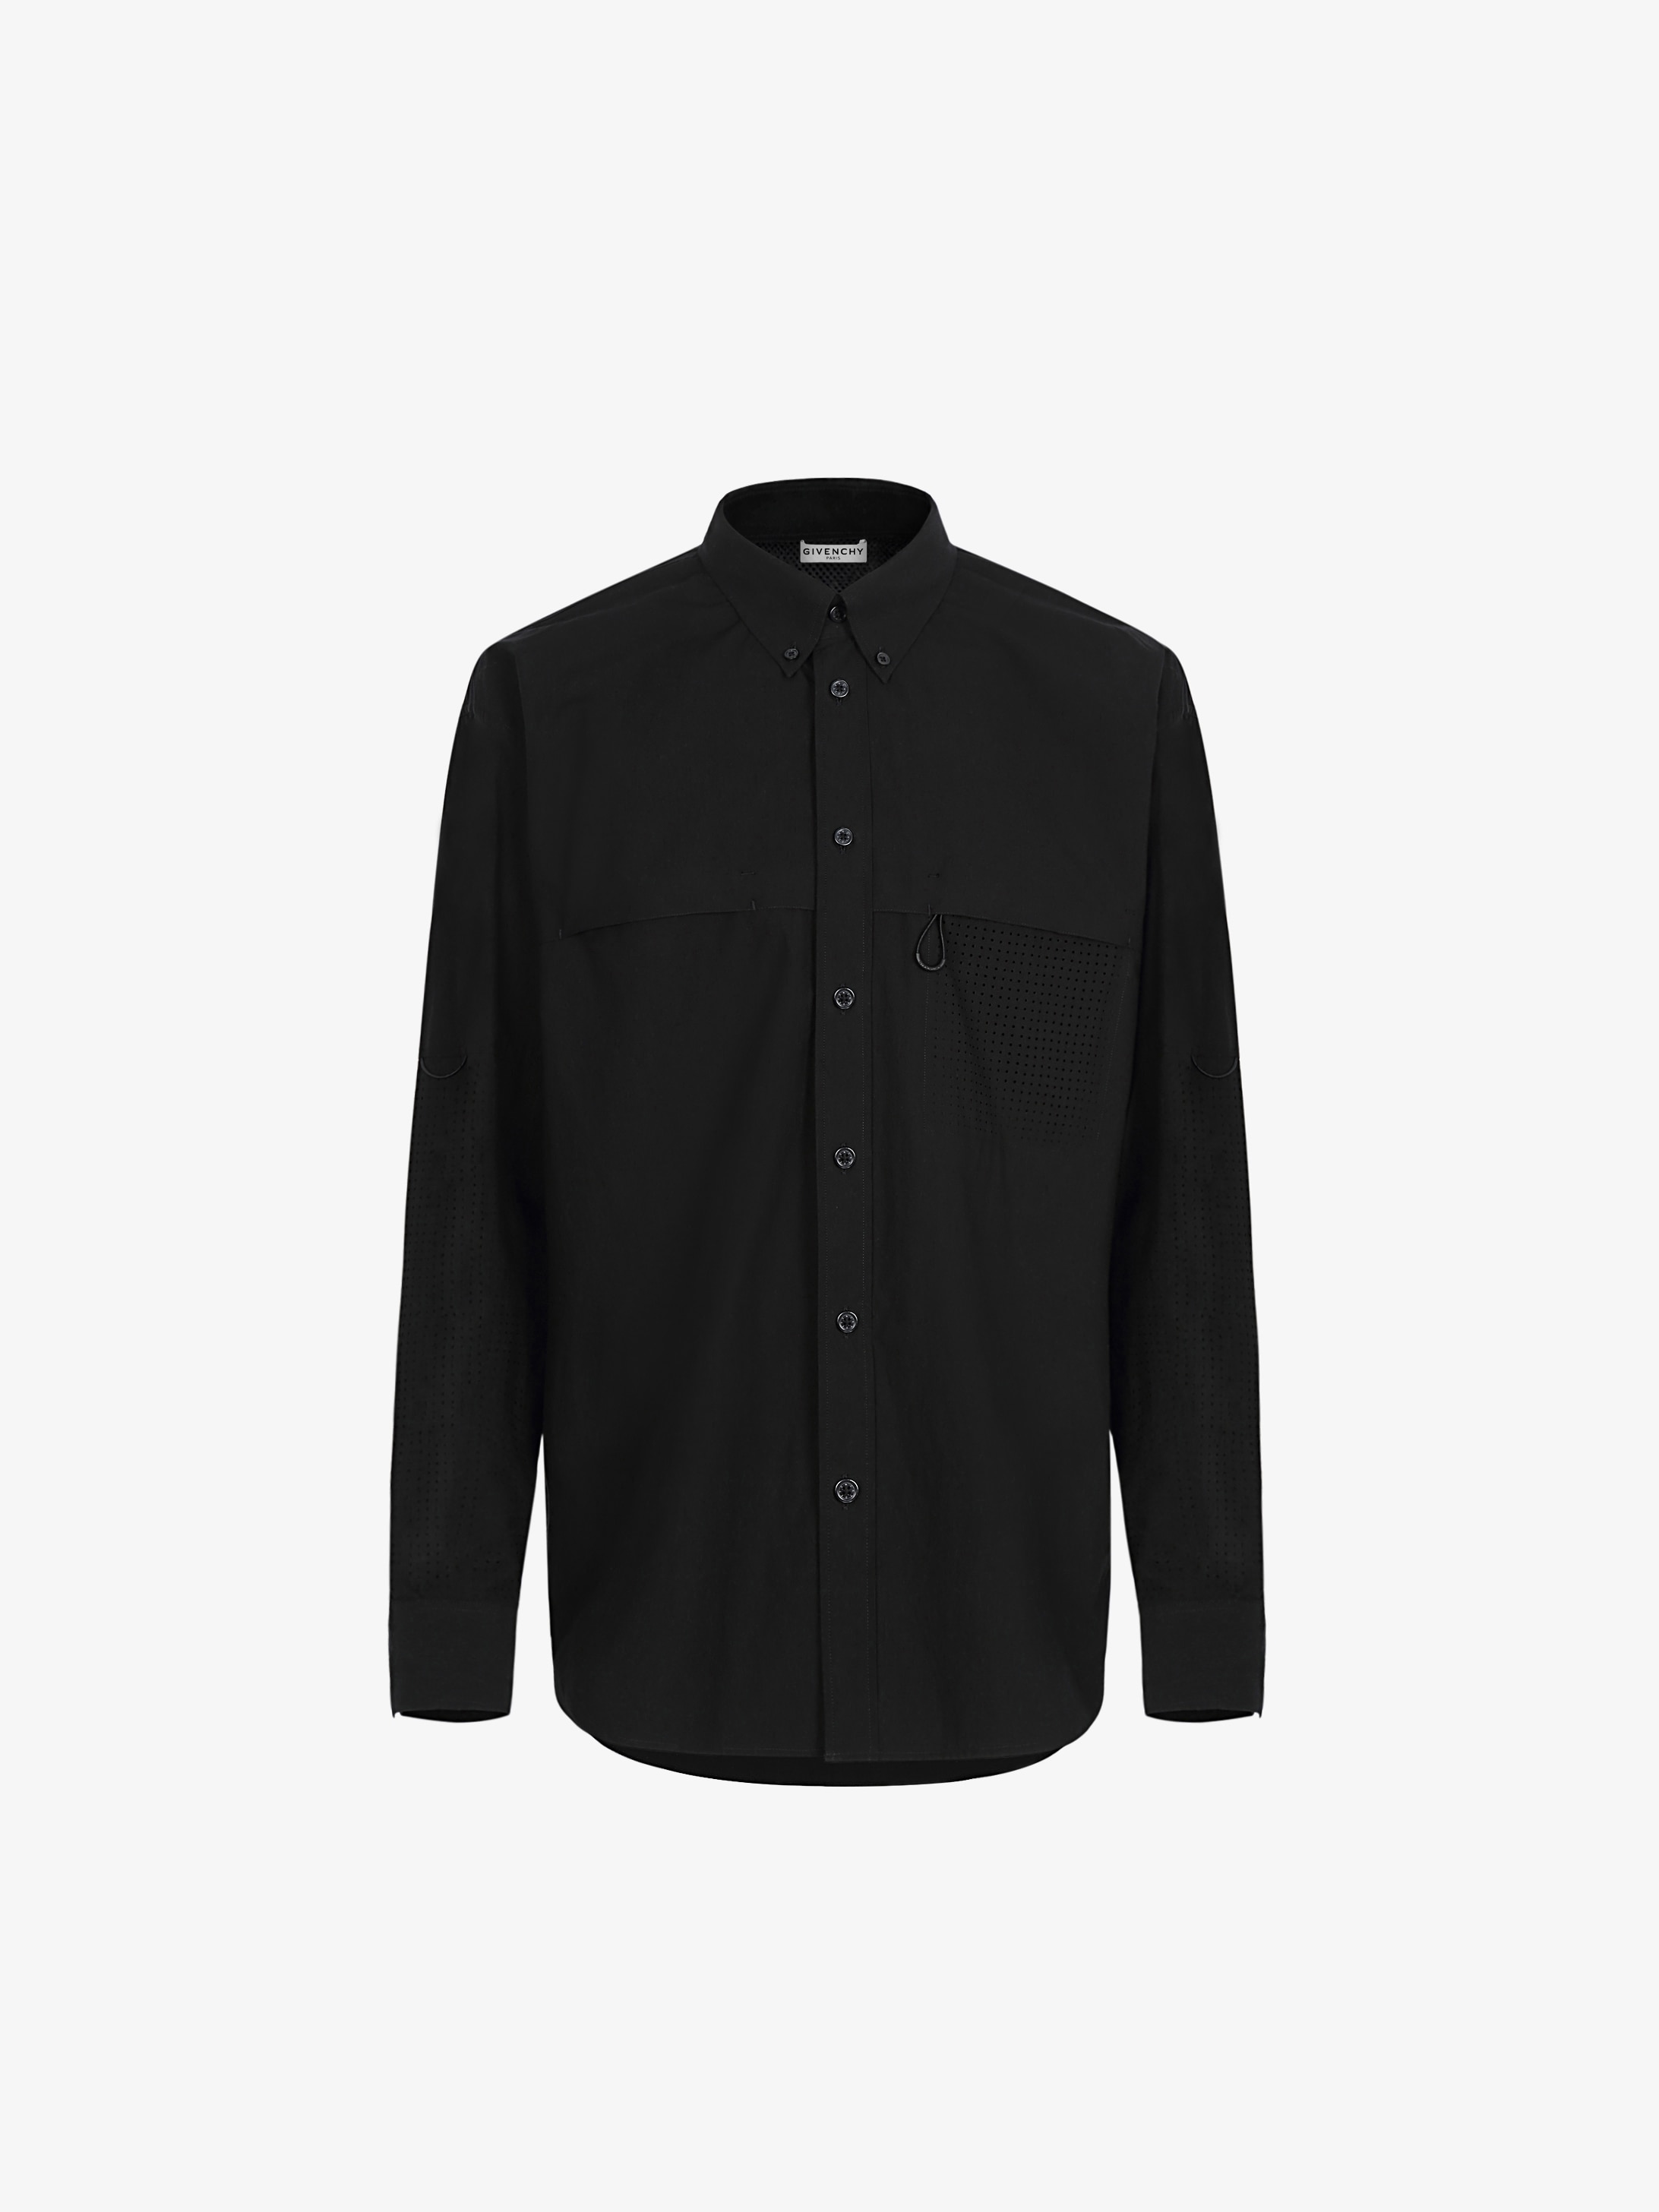 GIVENCHY perforated shirt in cotton | GIVENCHY Paris